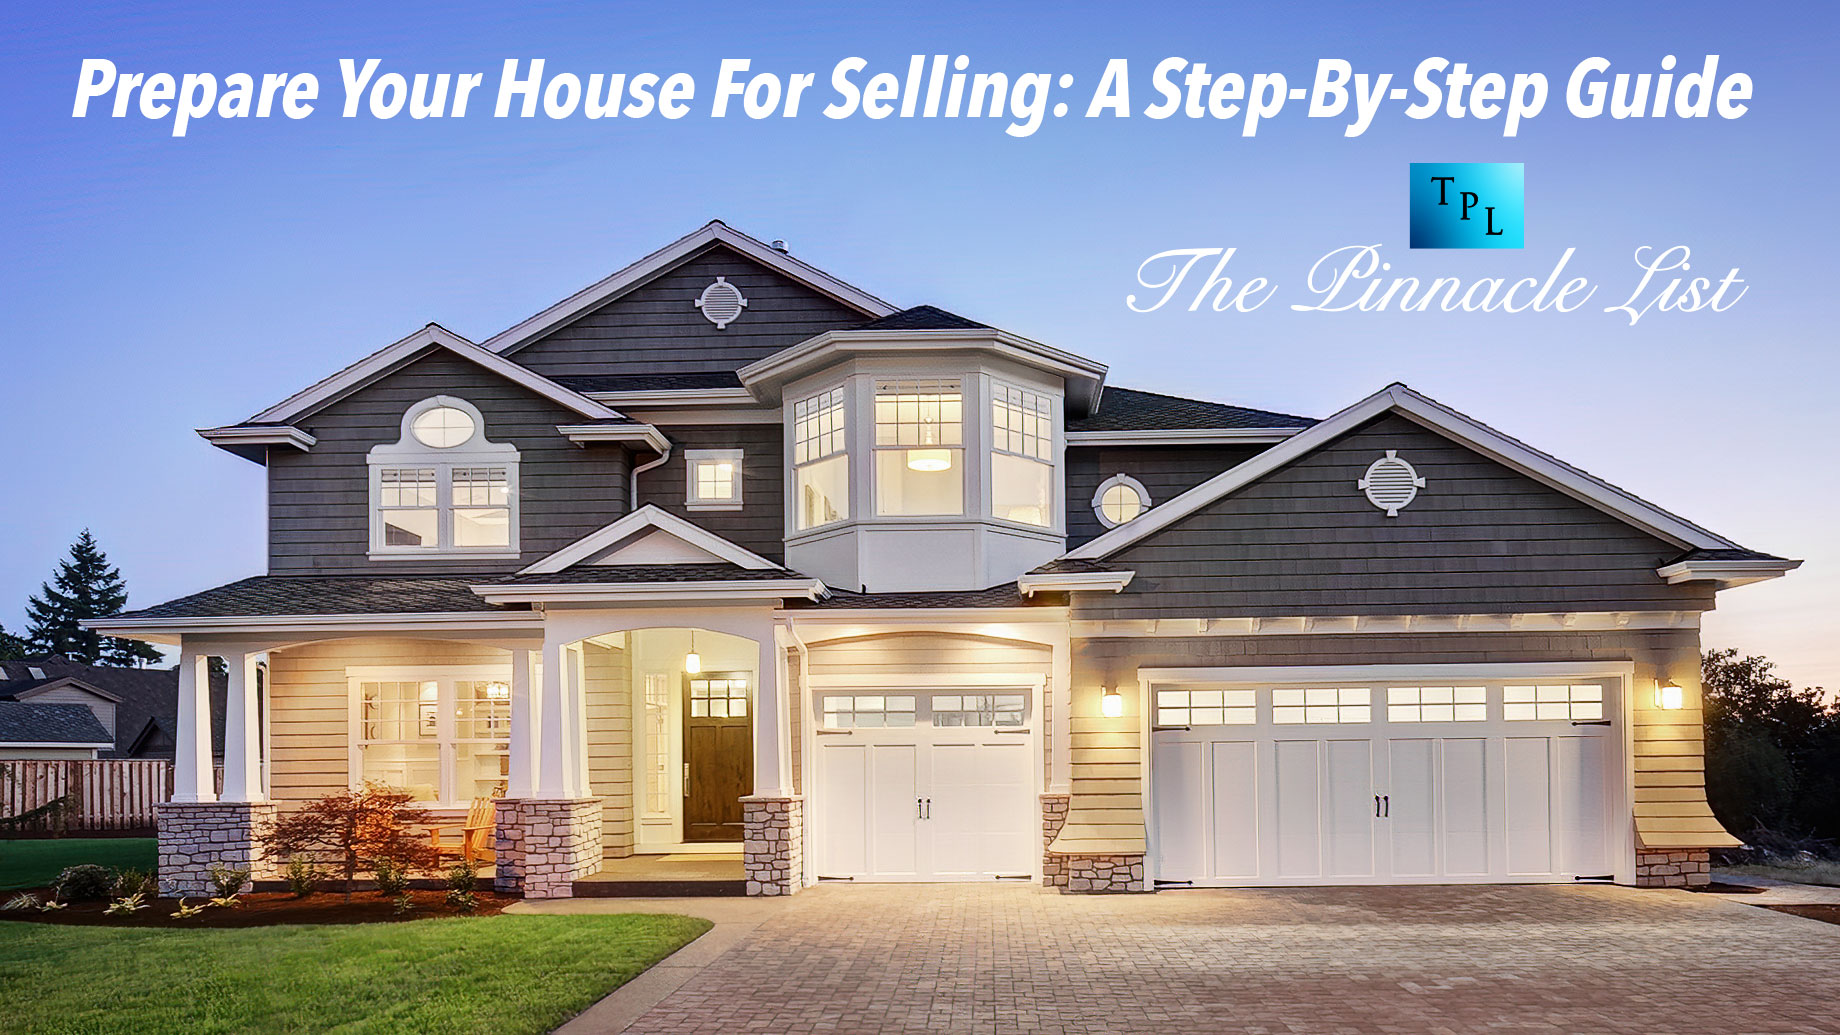 Prepare Your House For Selling: A Step-By-Step Guide